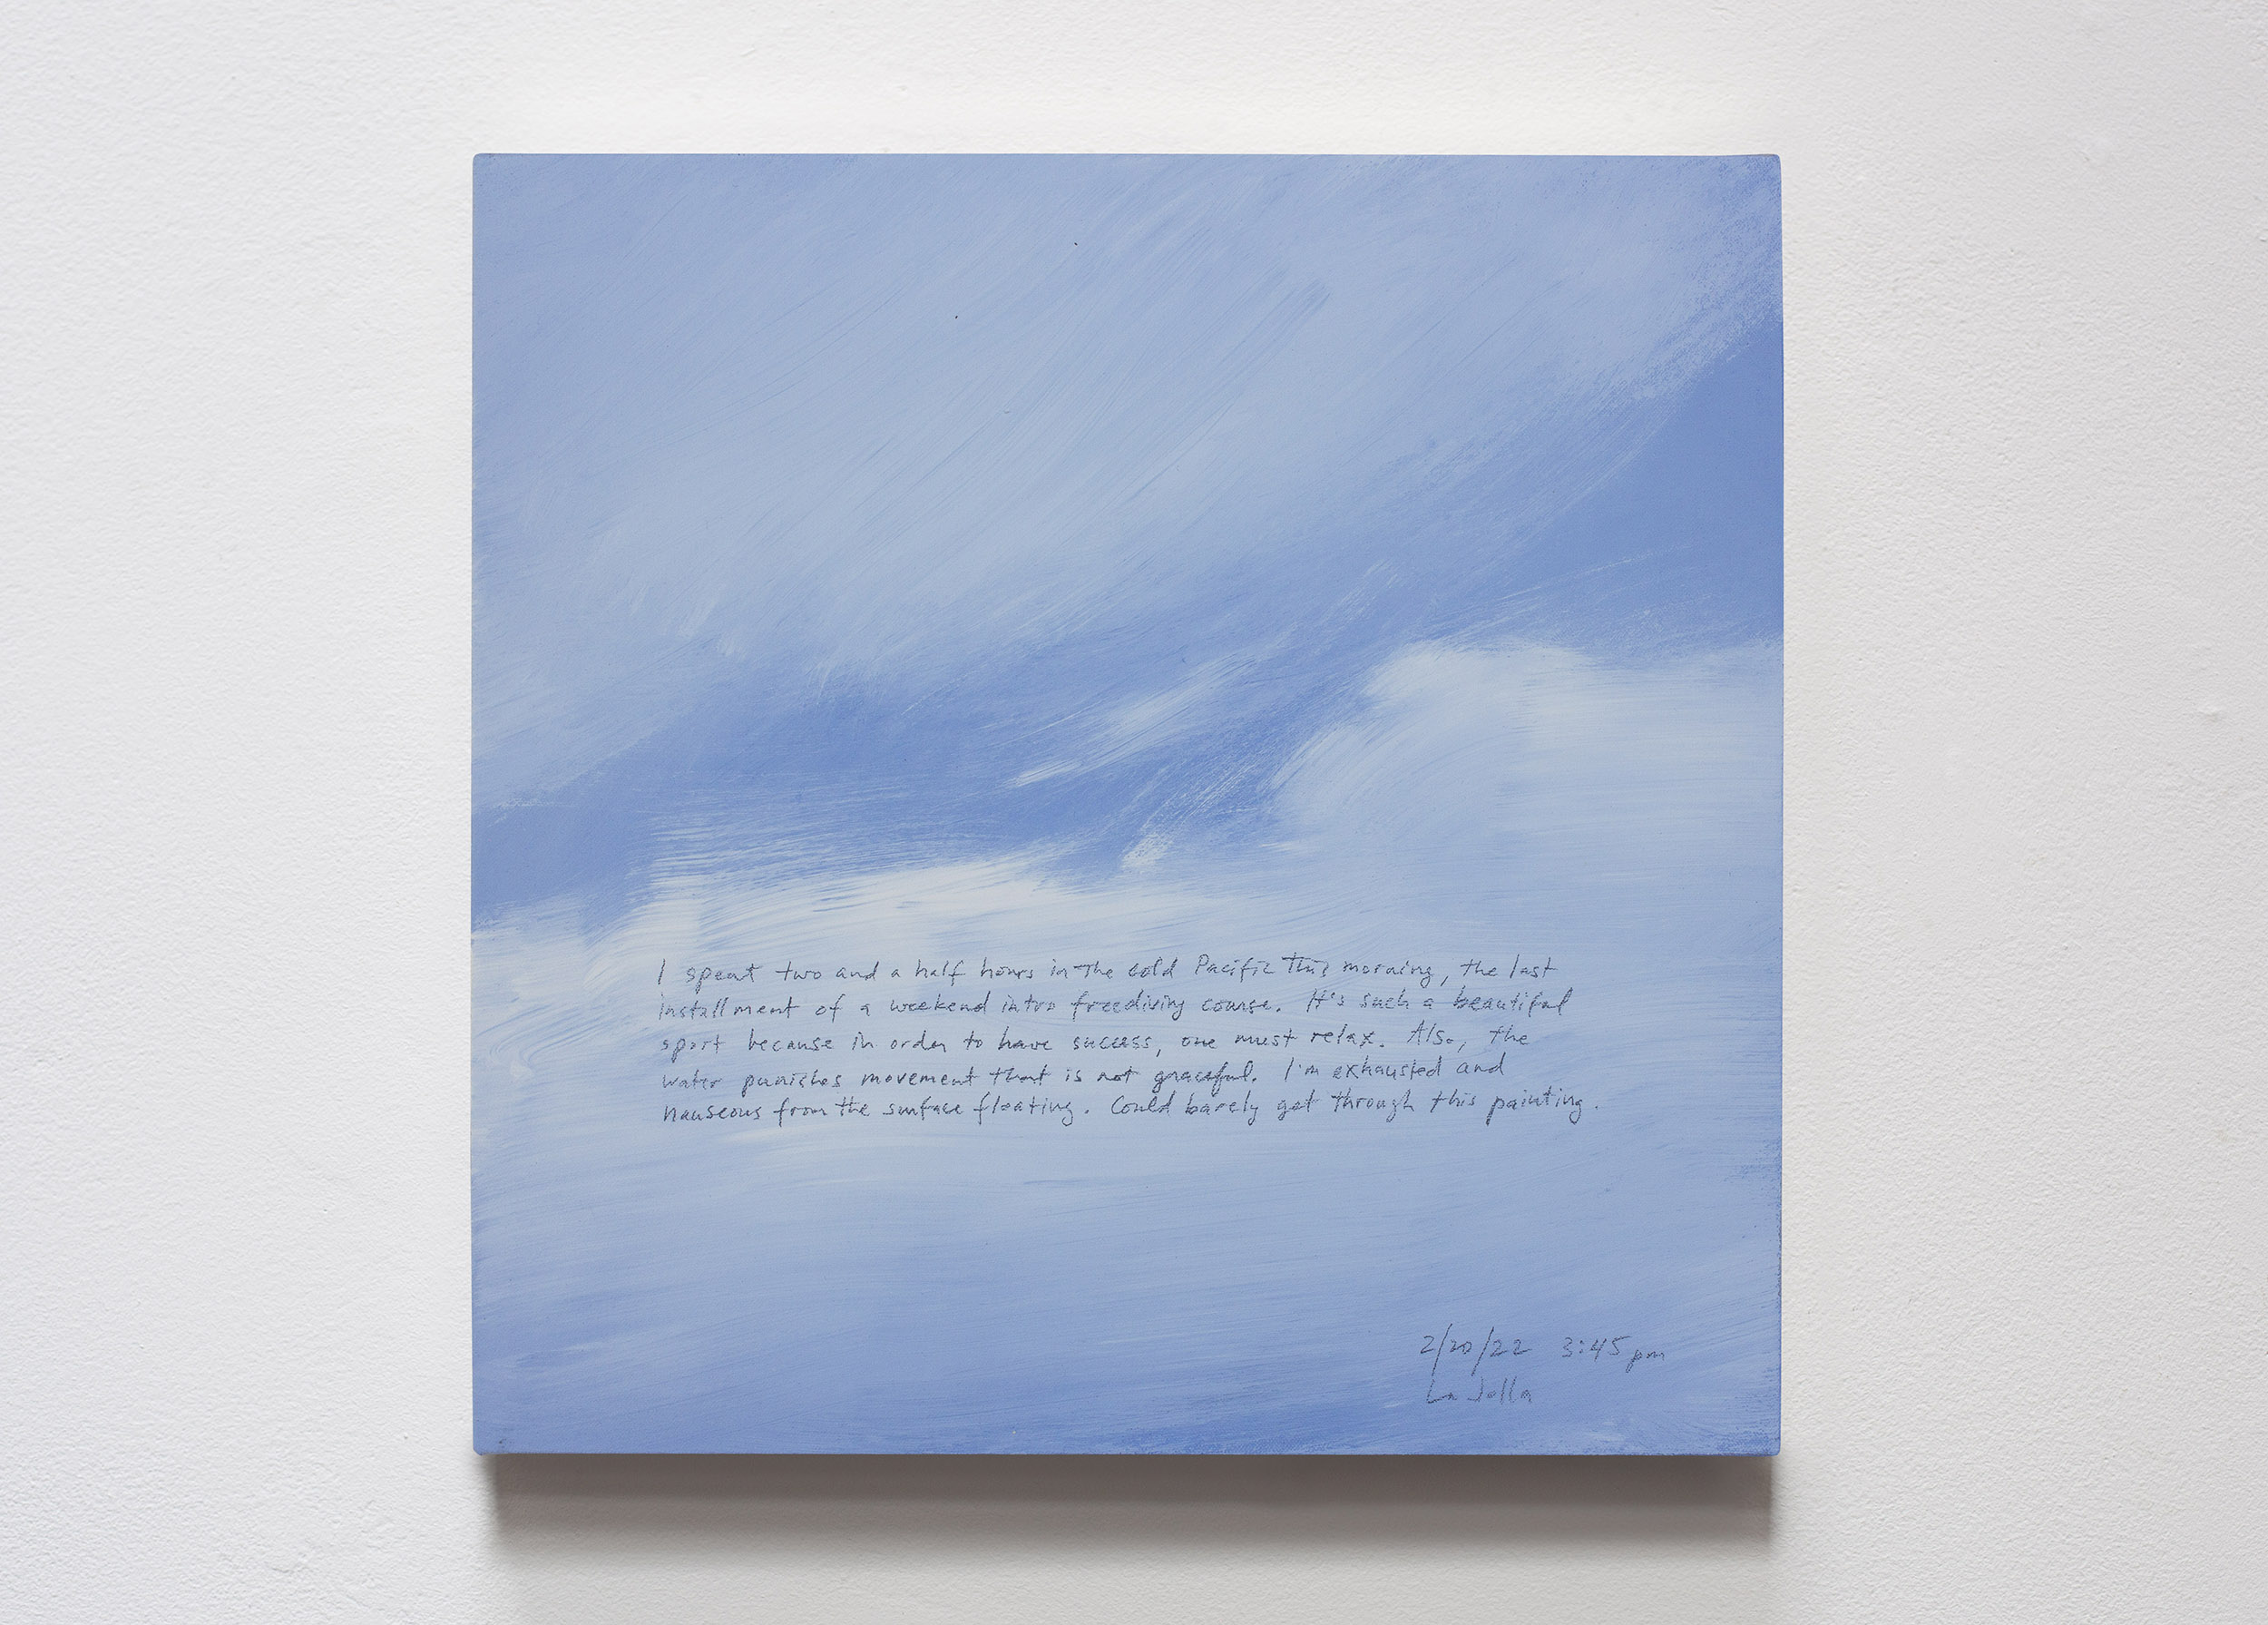 A 14 × 14 inch, acrylic painting of the sky. A journal entry is handwritten on the painting:

“I spent two and a half hours in the cold Pacific this morning, the last installment of a weekend intro freediving course. It’s such a beautiful sport because in order to have success, one must relax. Also, the water punishes movement that is not graceful. I’m exhausted and nauseous from the surface floating. Could barely get through this painting.

2/20/22  3:45 pm
La Jolla”